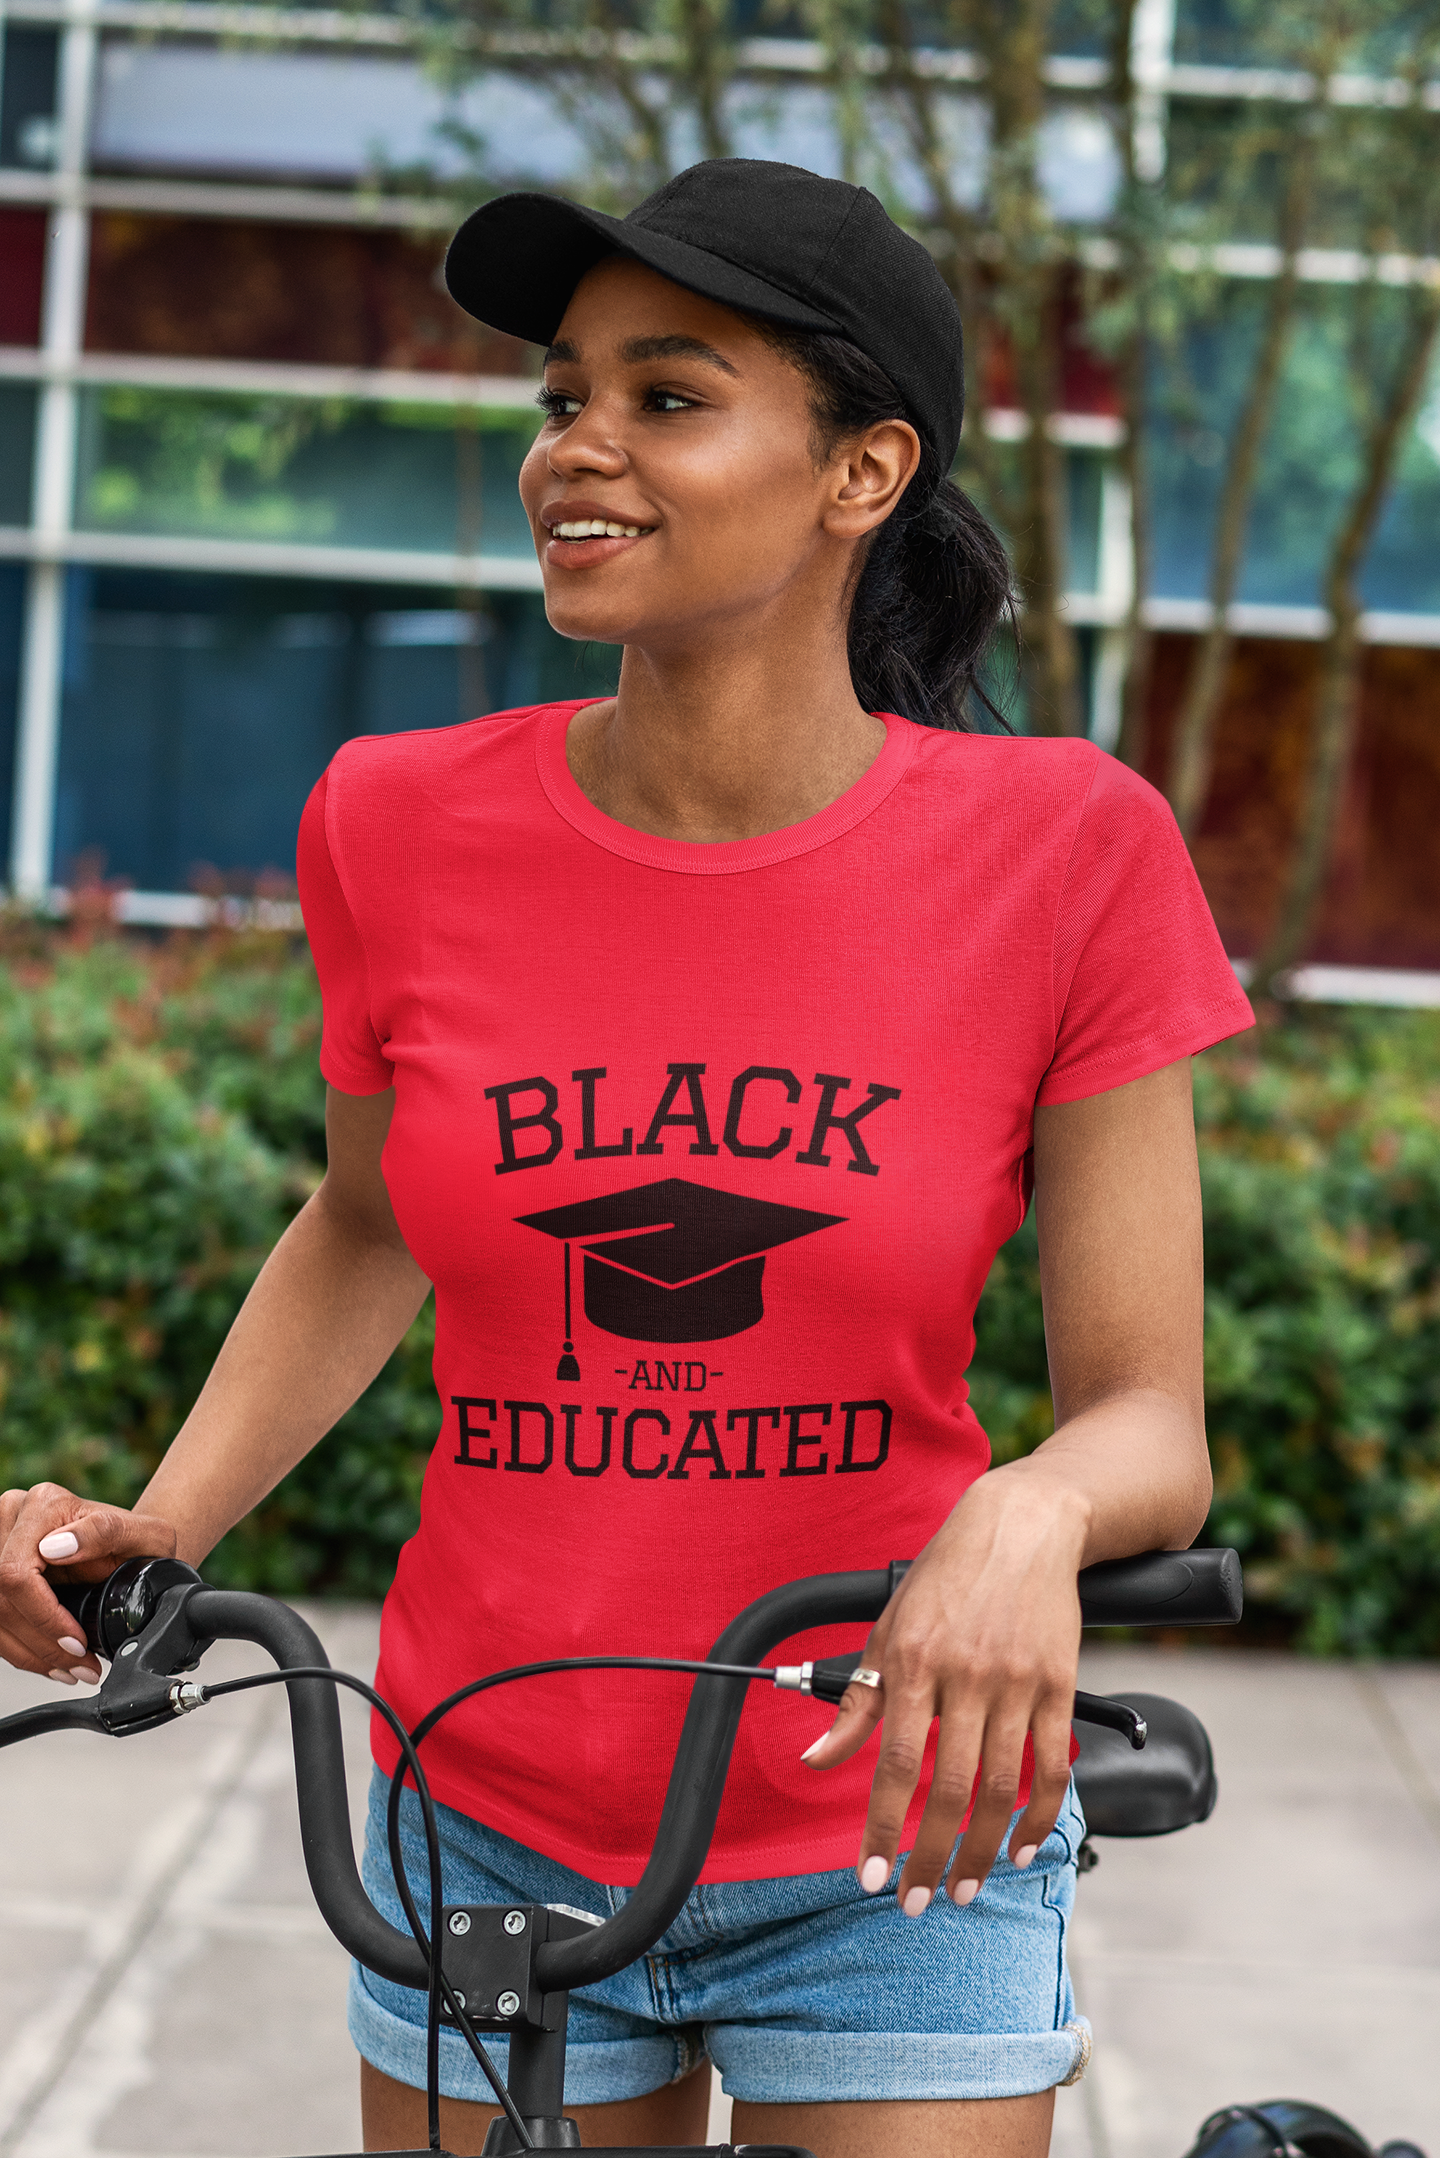 Black and Educated Women's T-Shirt